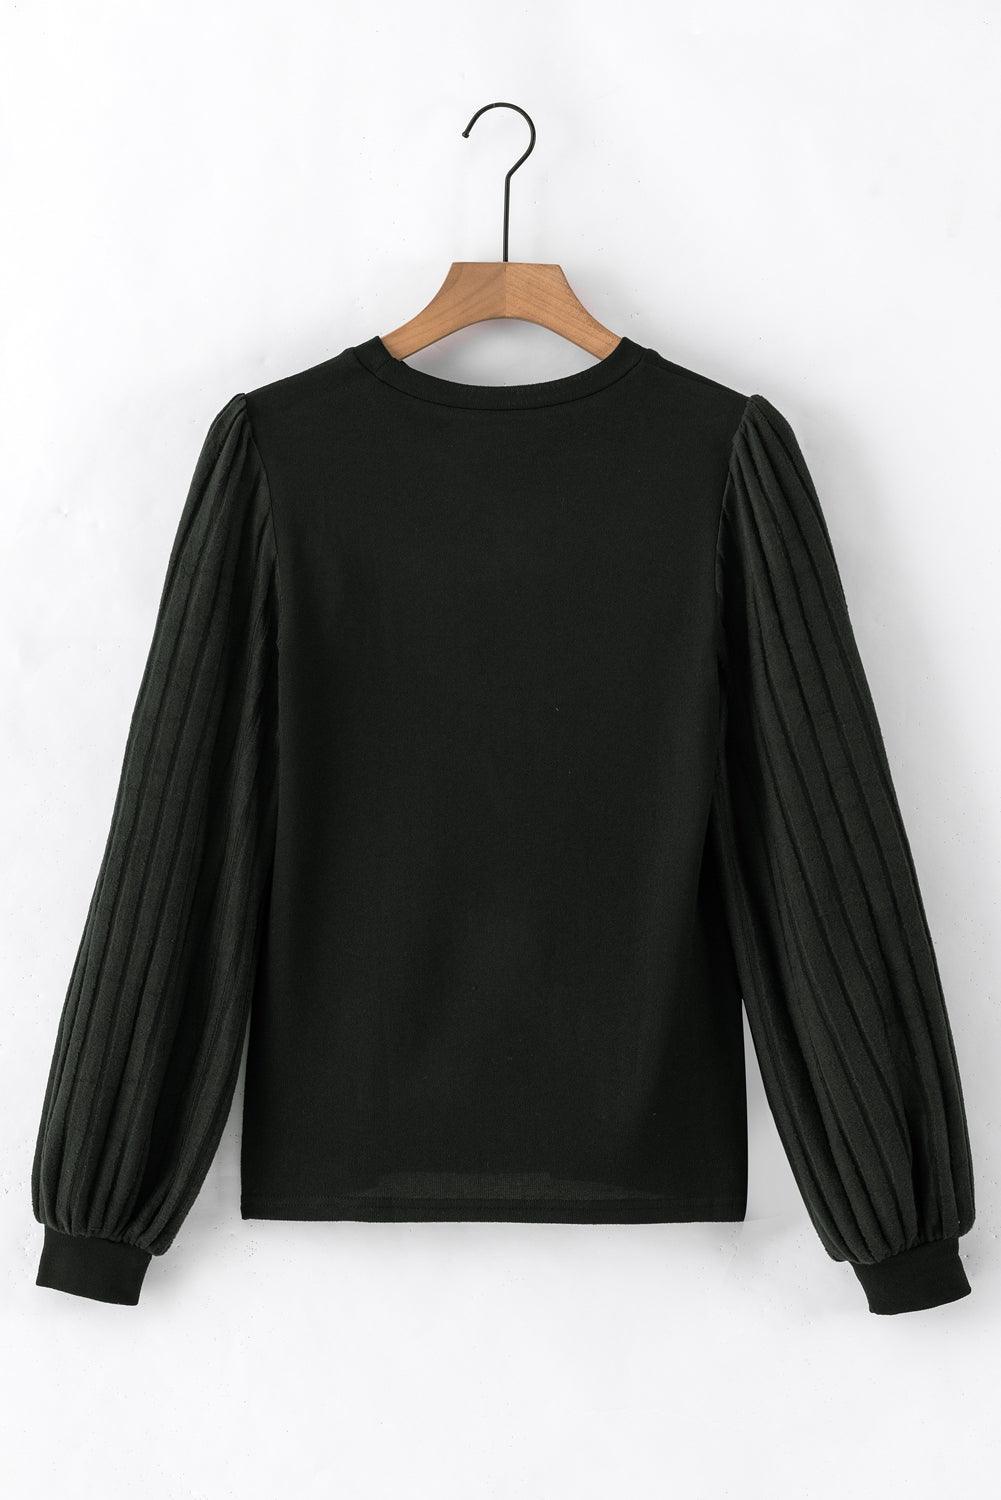 Black Knitted Long Sleeve Stretchy Crew Neck Top